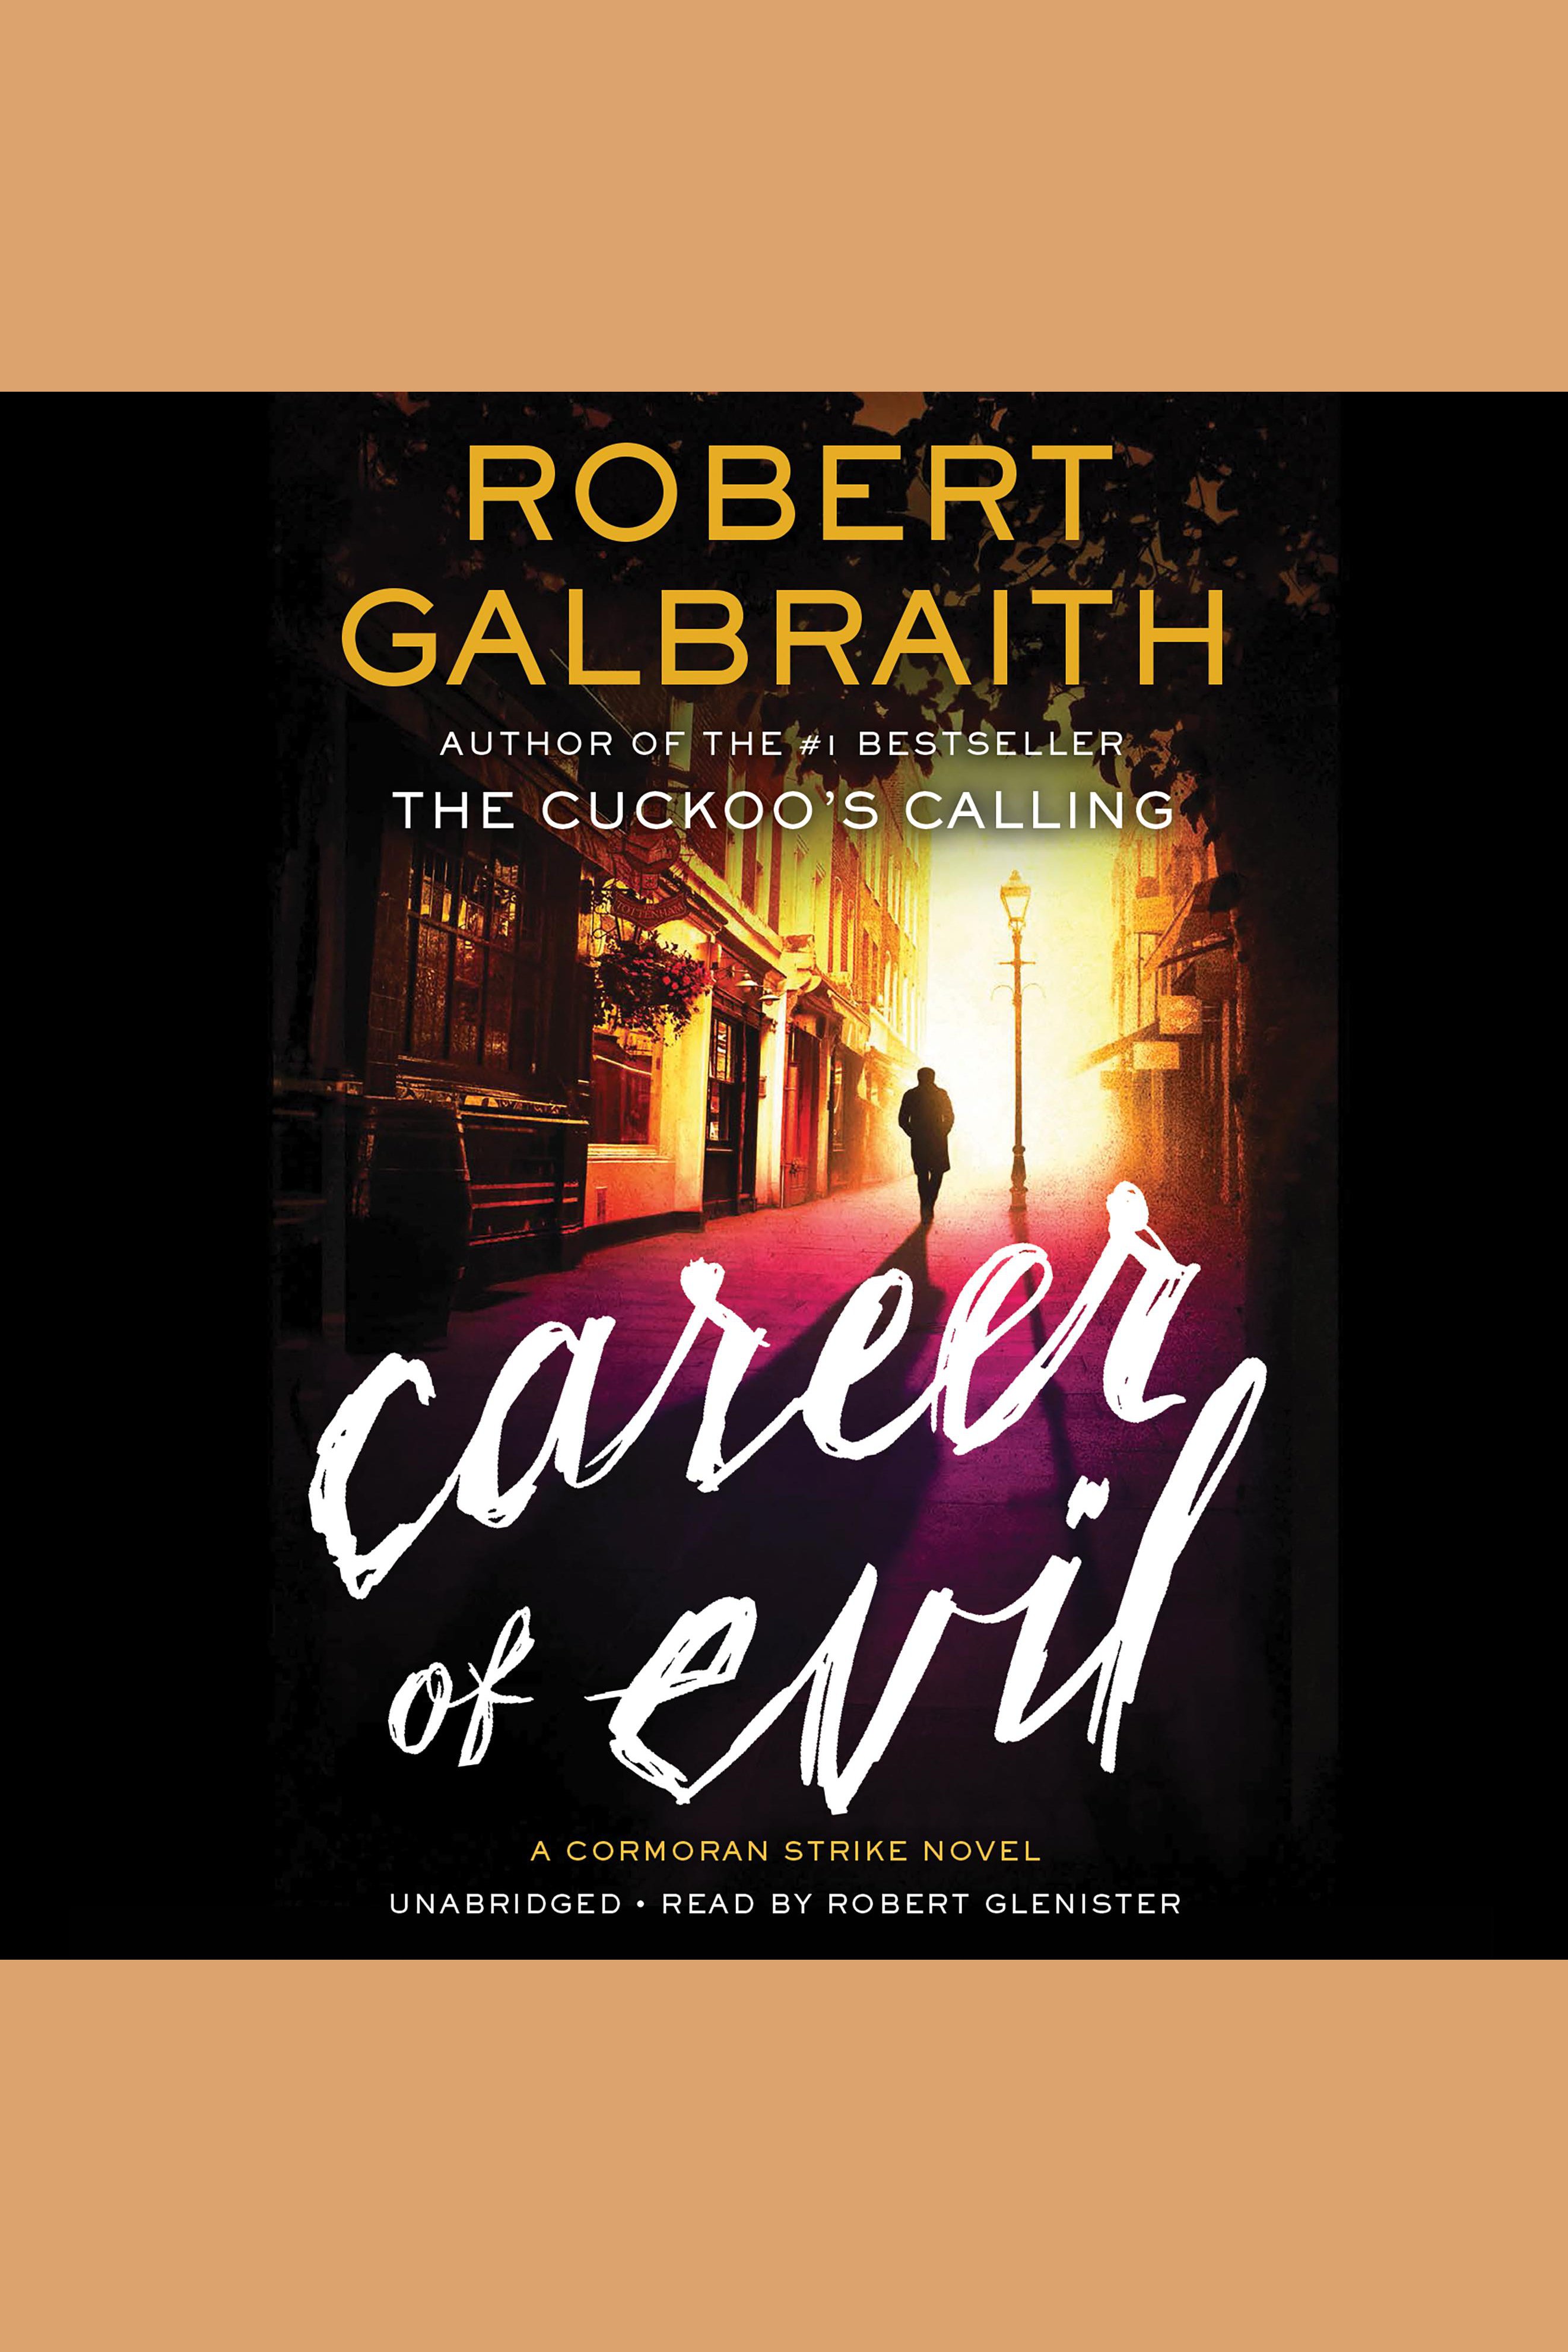 Career of evil cover image